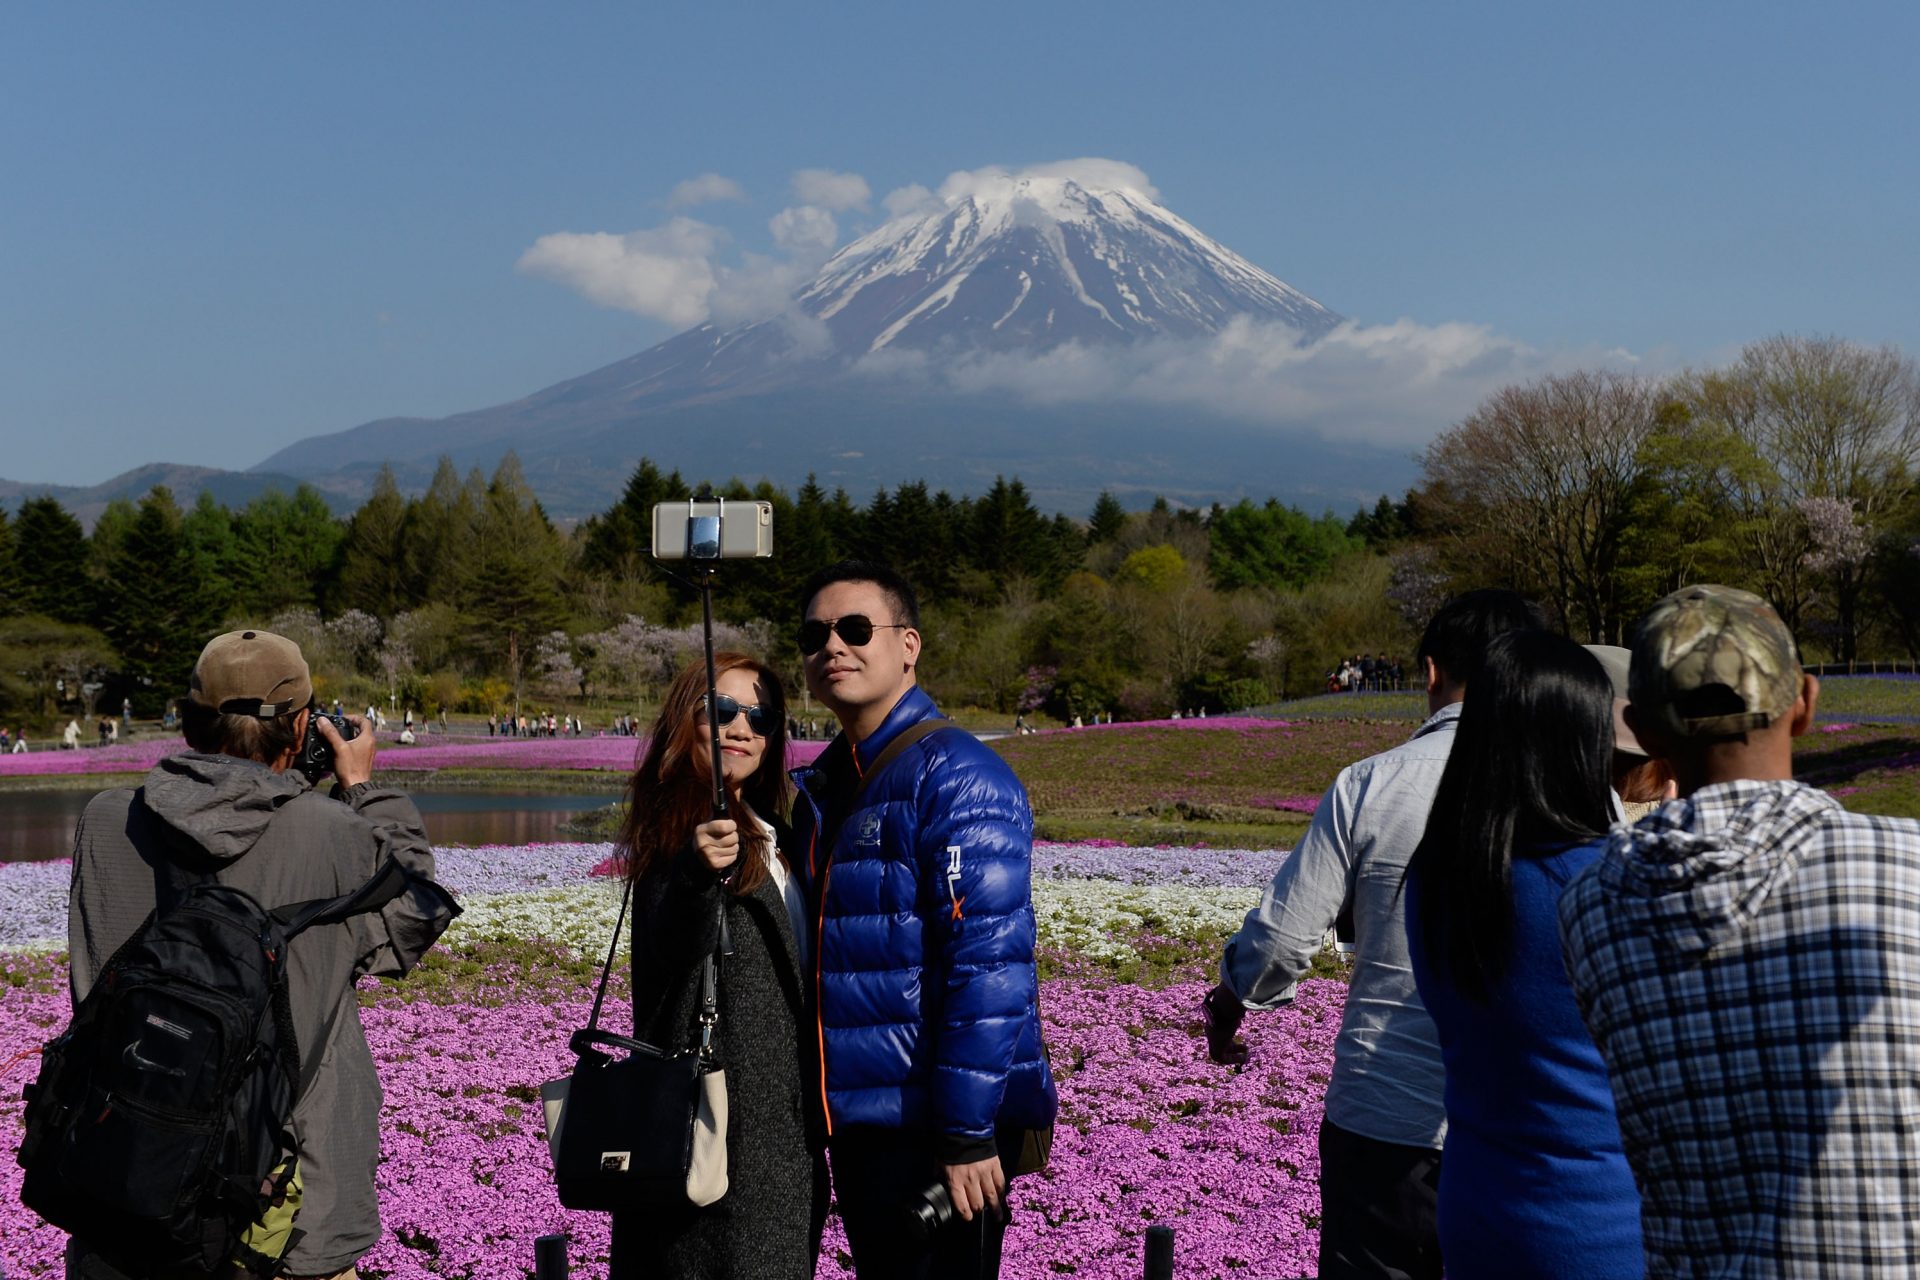 Why does this Japanese town want to build a wall to block Mount Fuji?